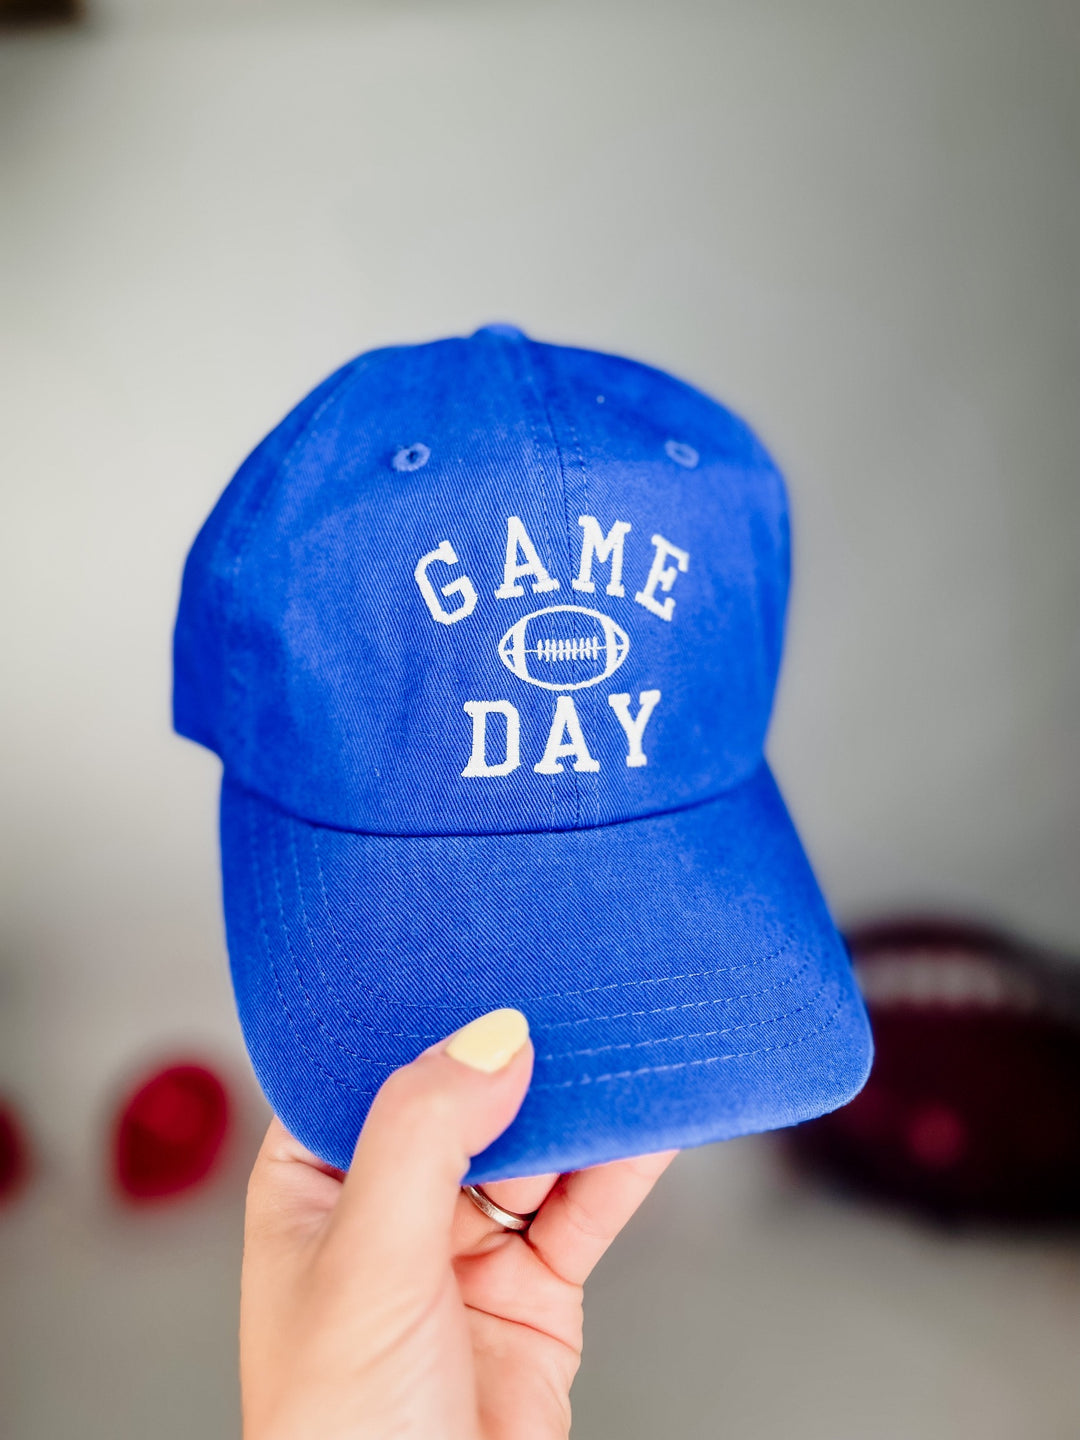 Gameday Football Embroidered Baseball Hat, Blue